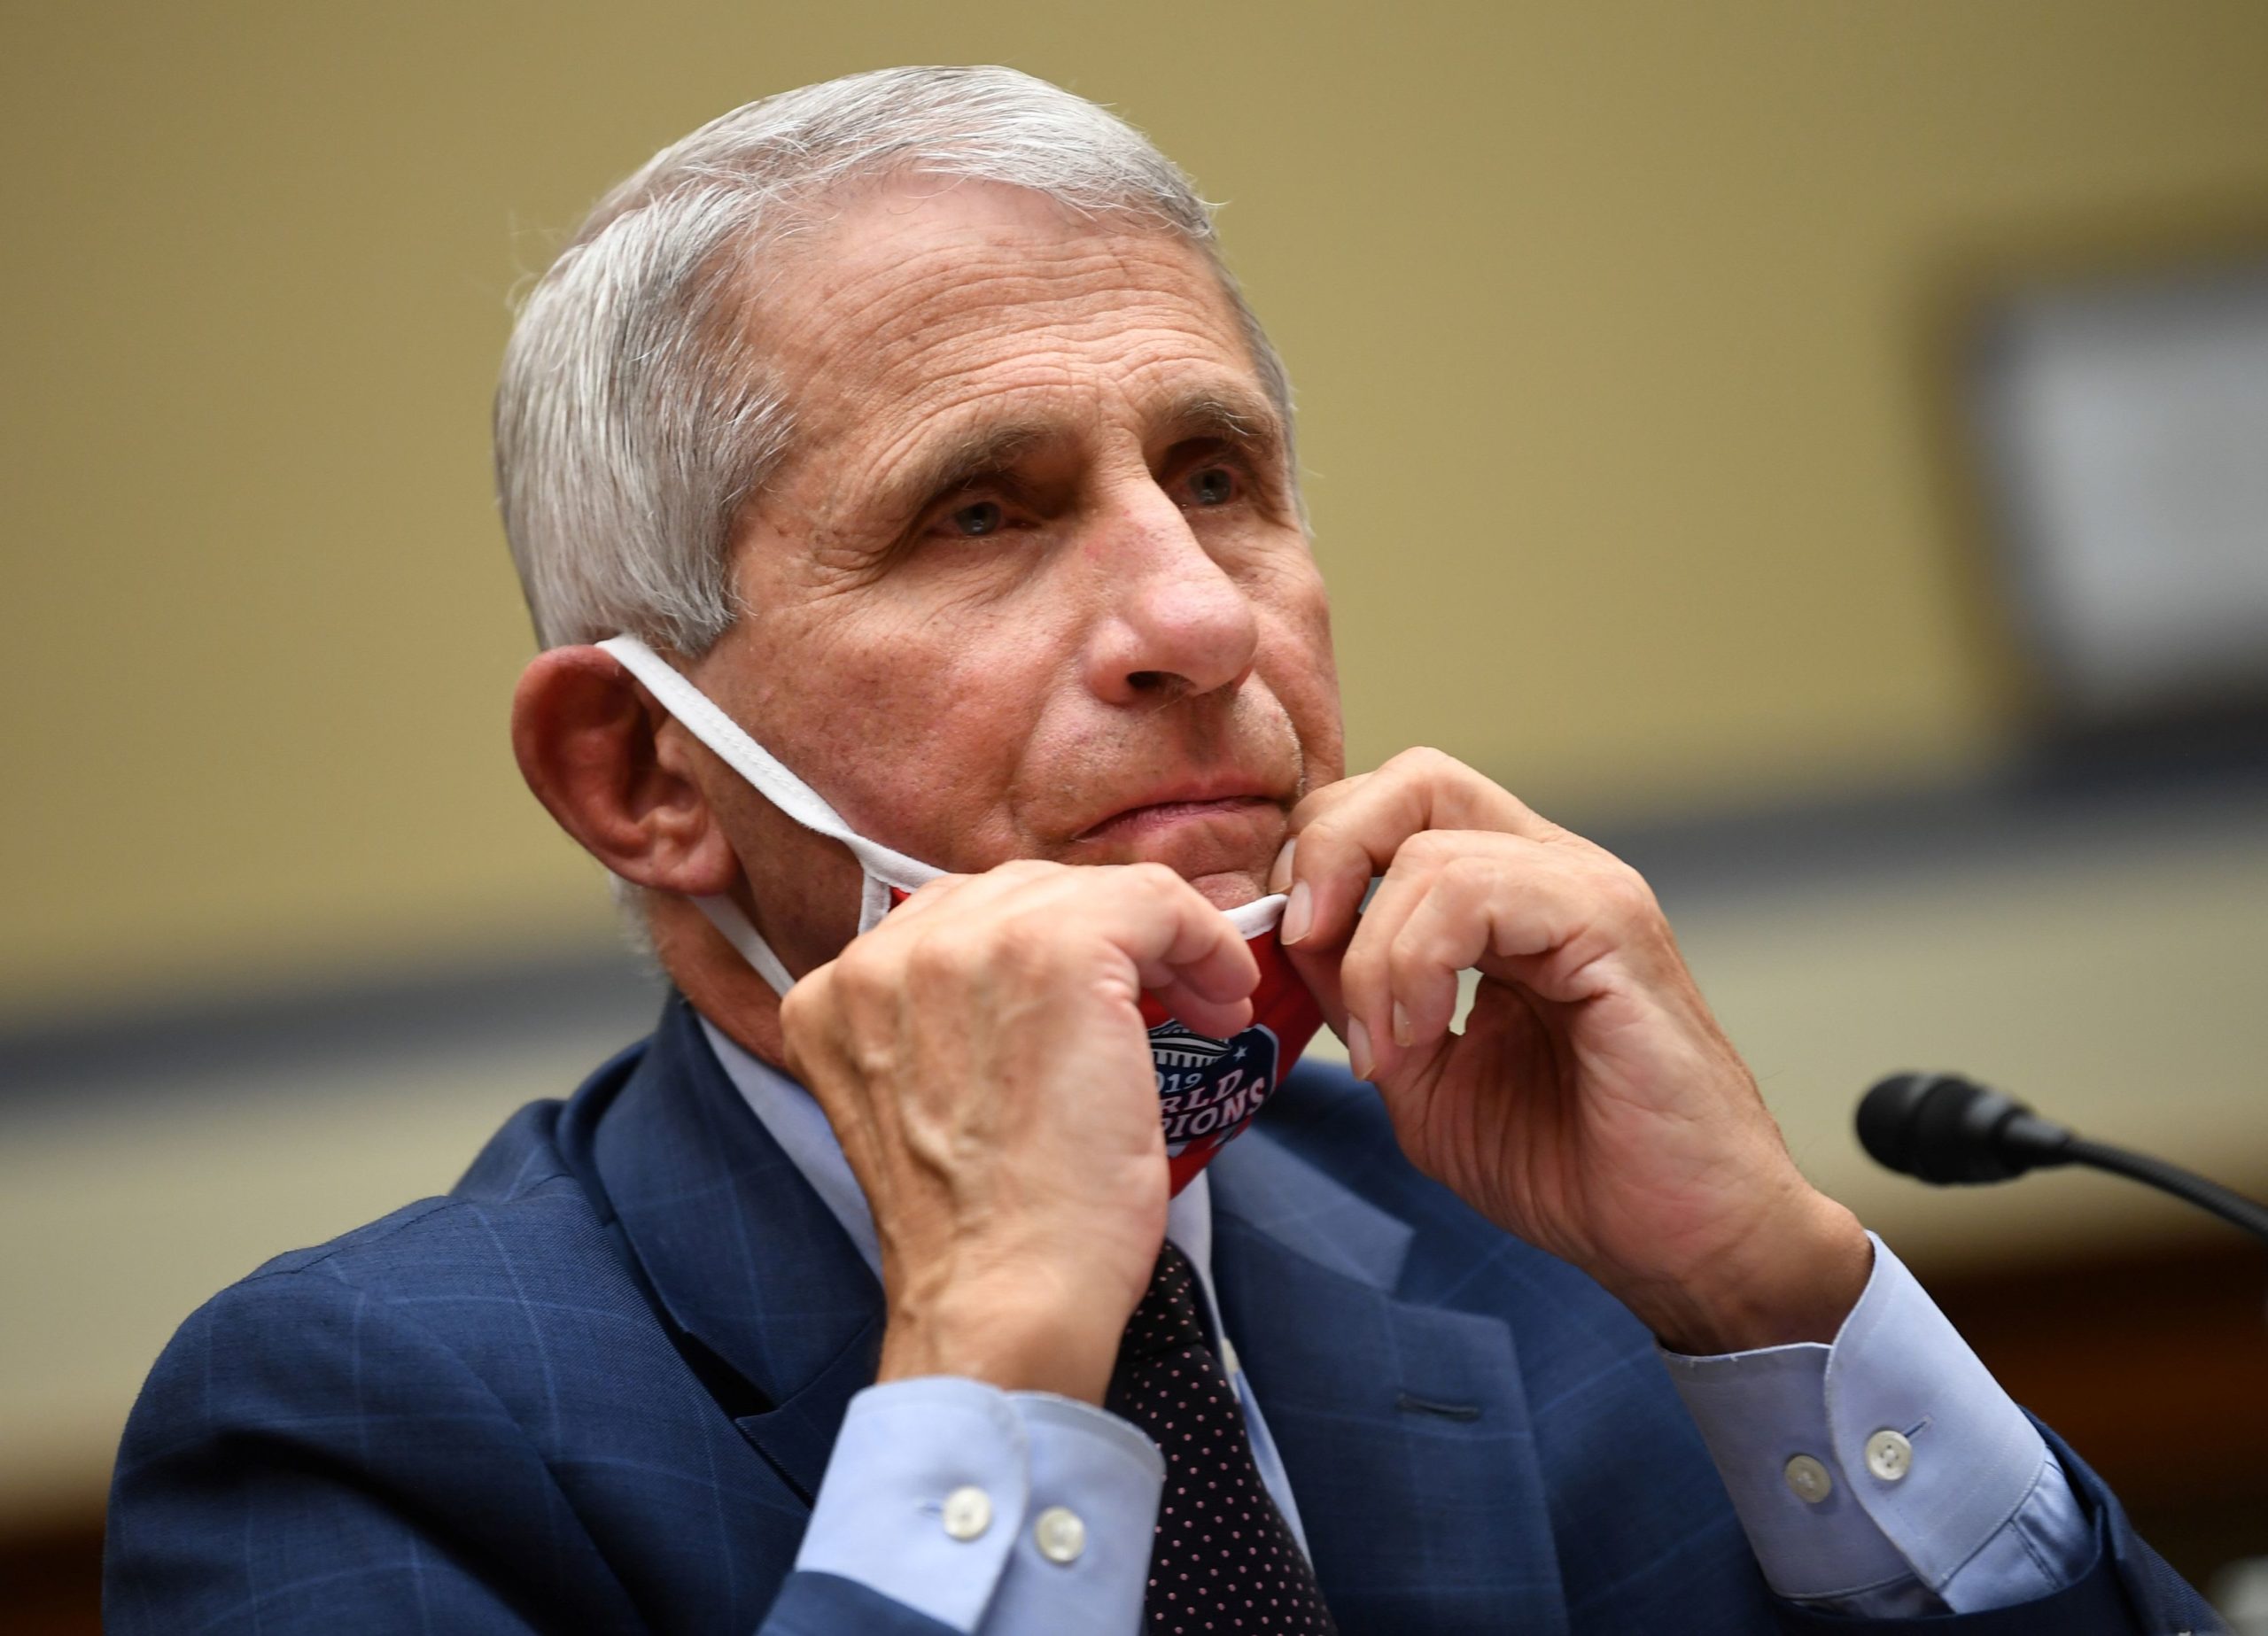 Dr. Fauci says U.S. faces ‘an entire lot of bother’ as coronavirus instances rise heading into winter